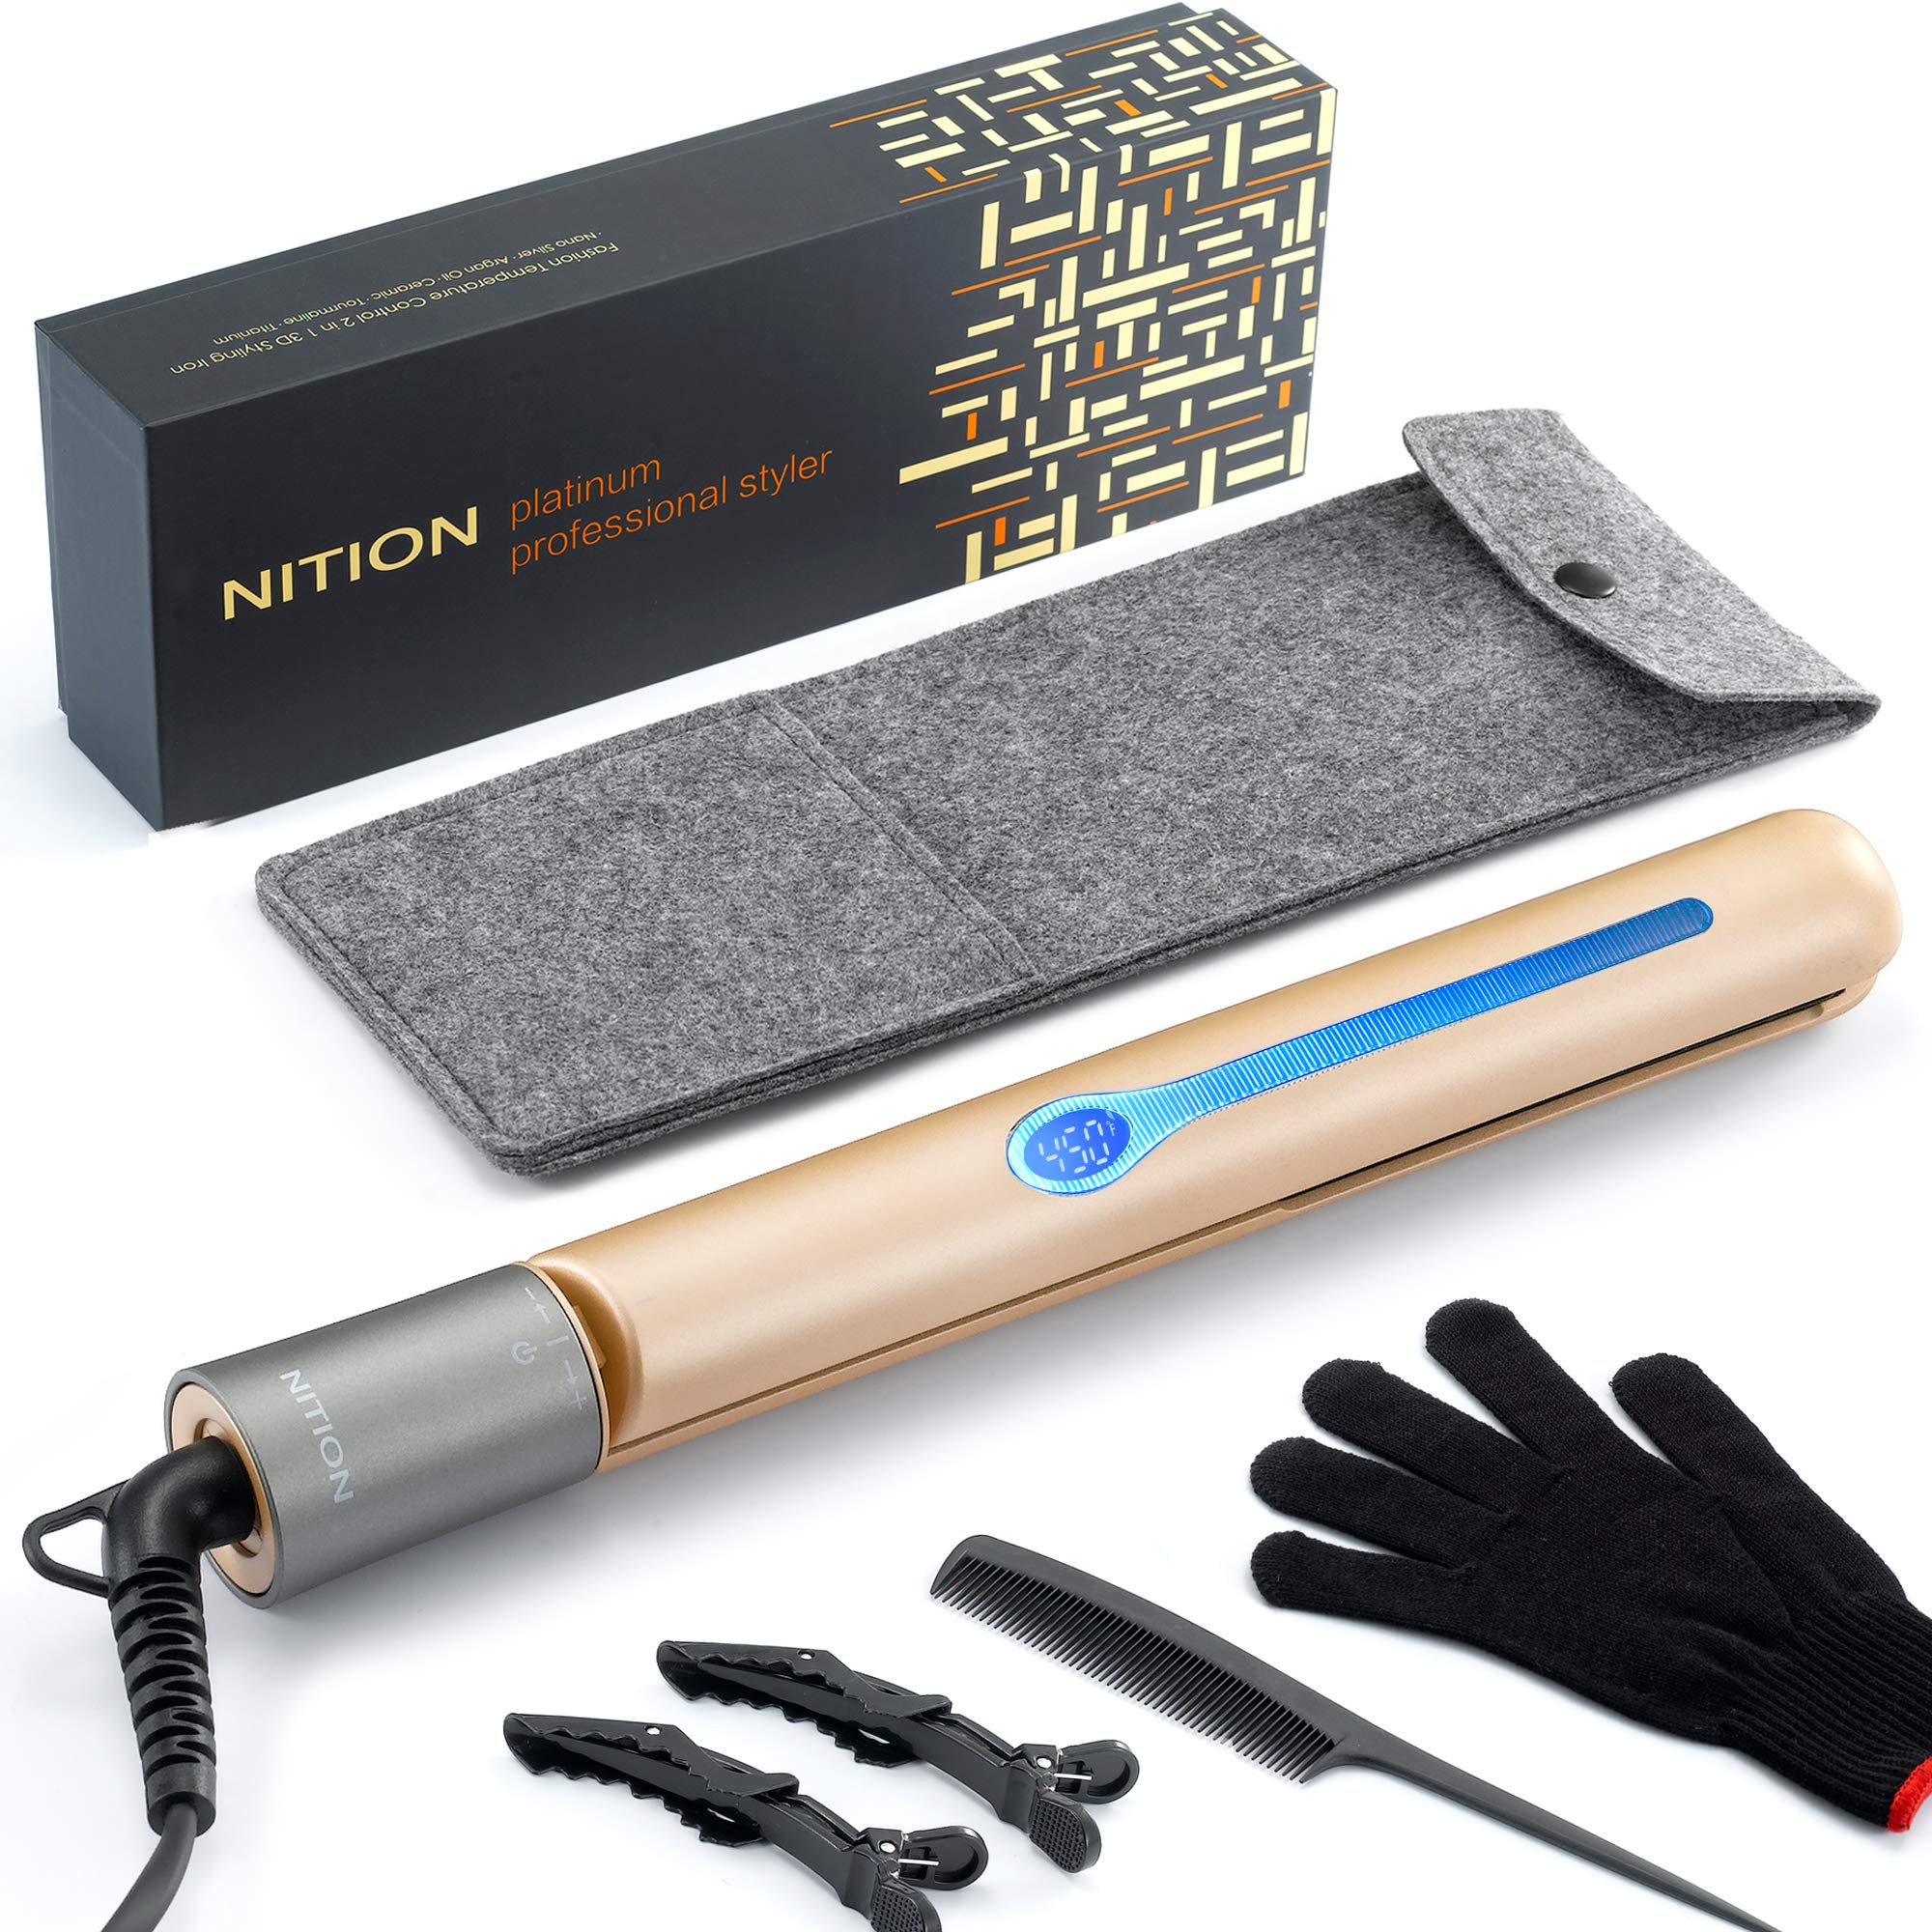 NITION Salon Professional Hair Straightener Argan Oil Ceramic Tourmaline Titanium 1 inch Plate Straightening Flat Iron Styling Tools,LCD 450°F. 2-in-1 Curling Iron for All Hair Type,Gold,